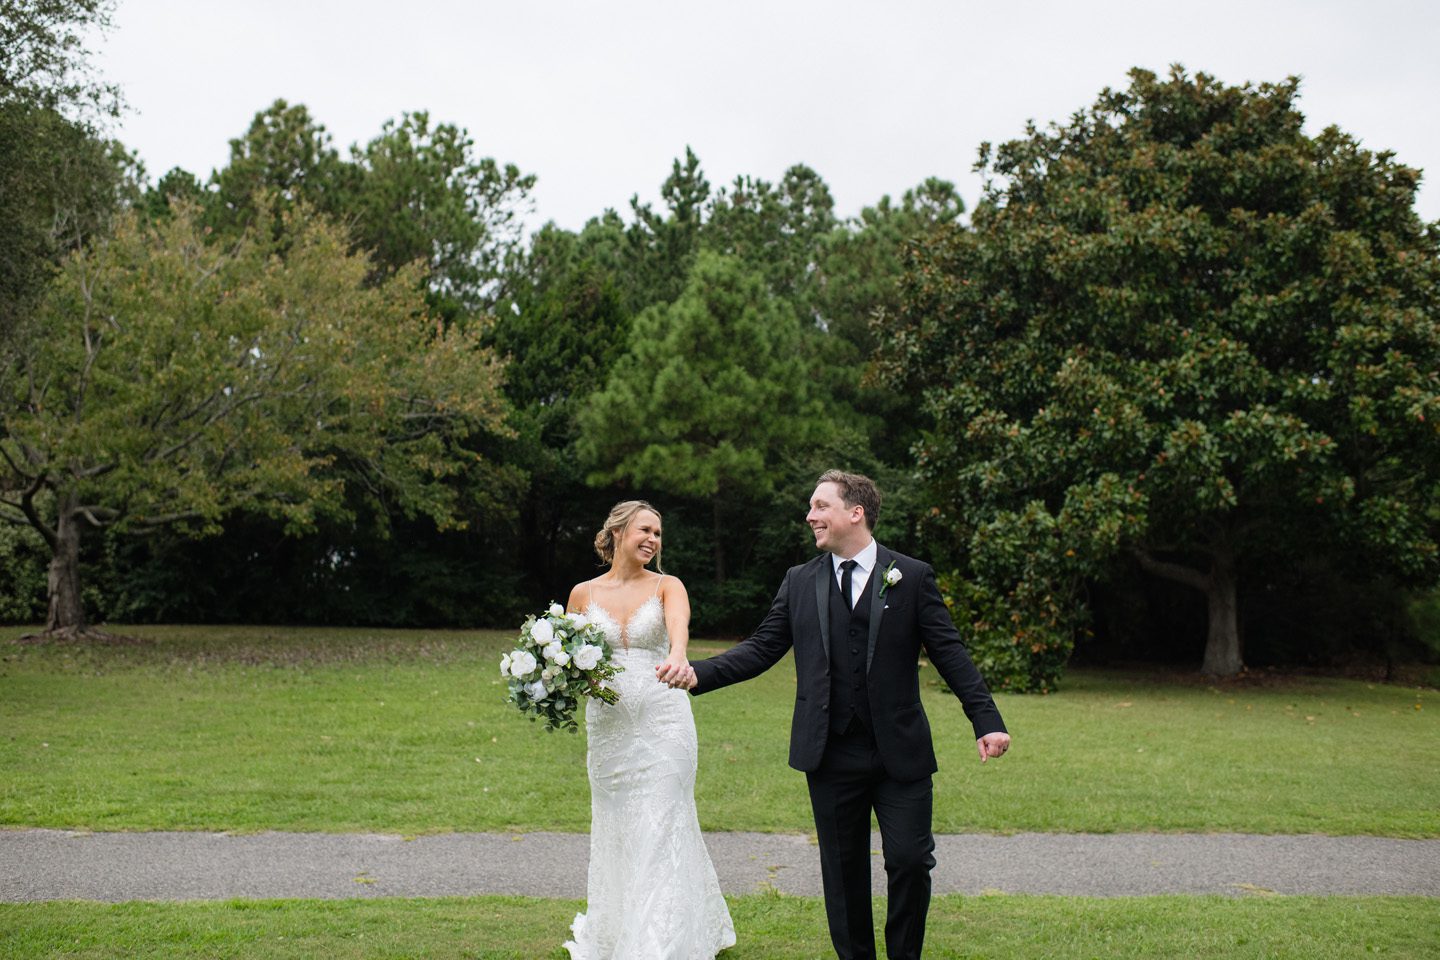 Bride and groom walking to their wedding ceremony at Festival Park in Manteo